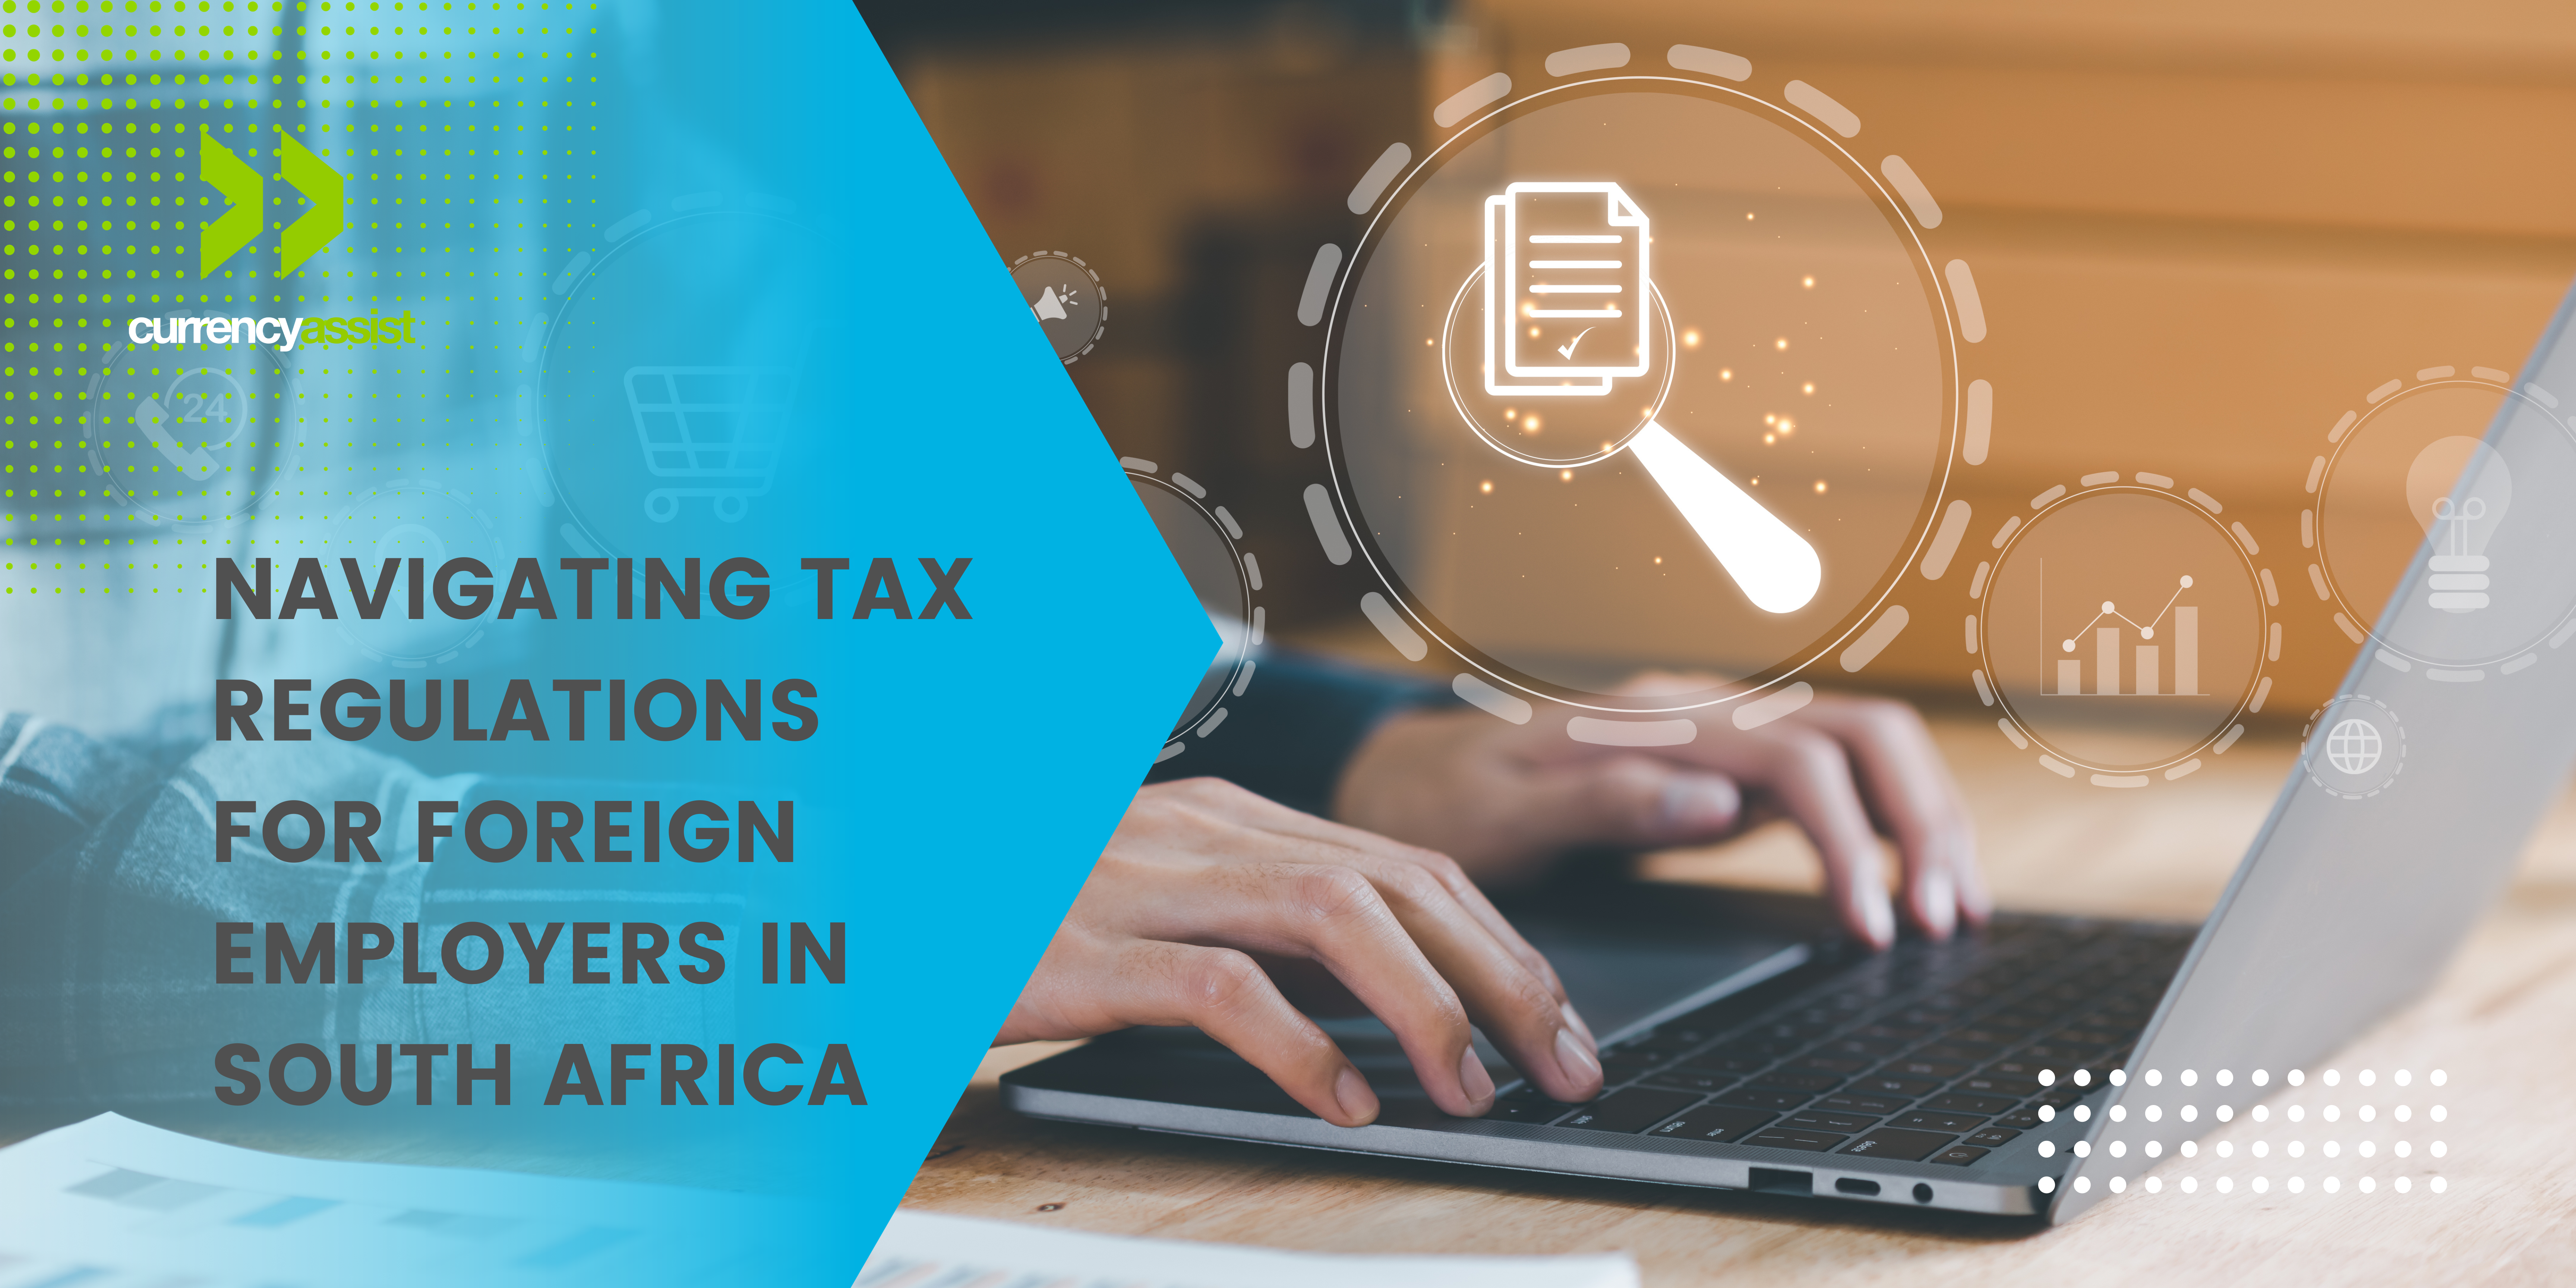 Navigating Tax Regulations for Foreign Employers in South Africa